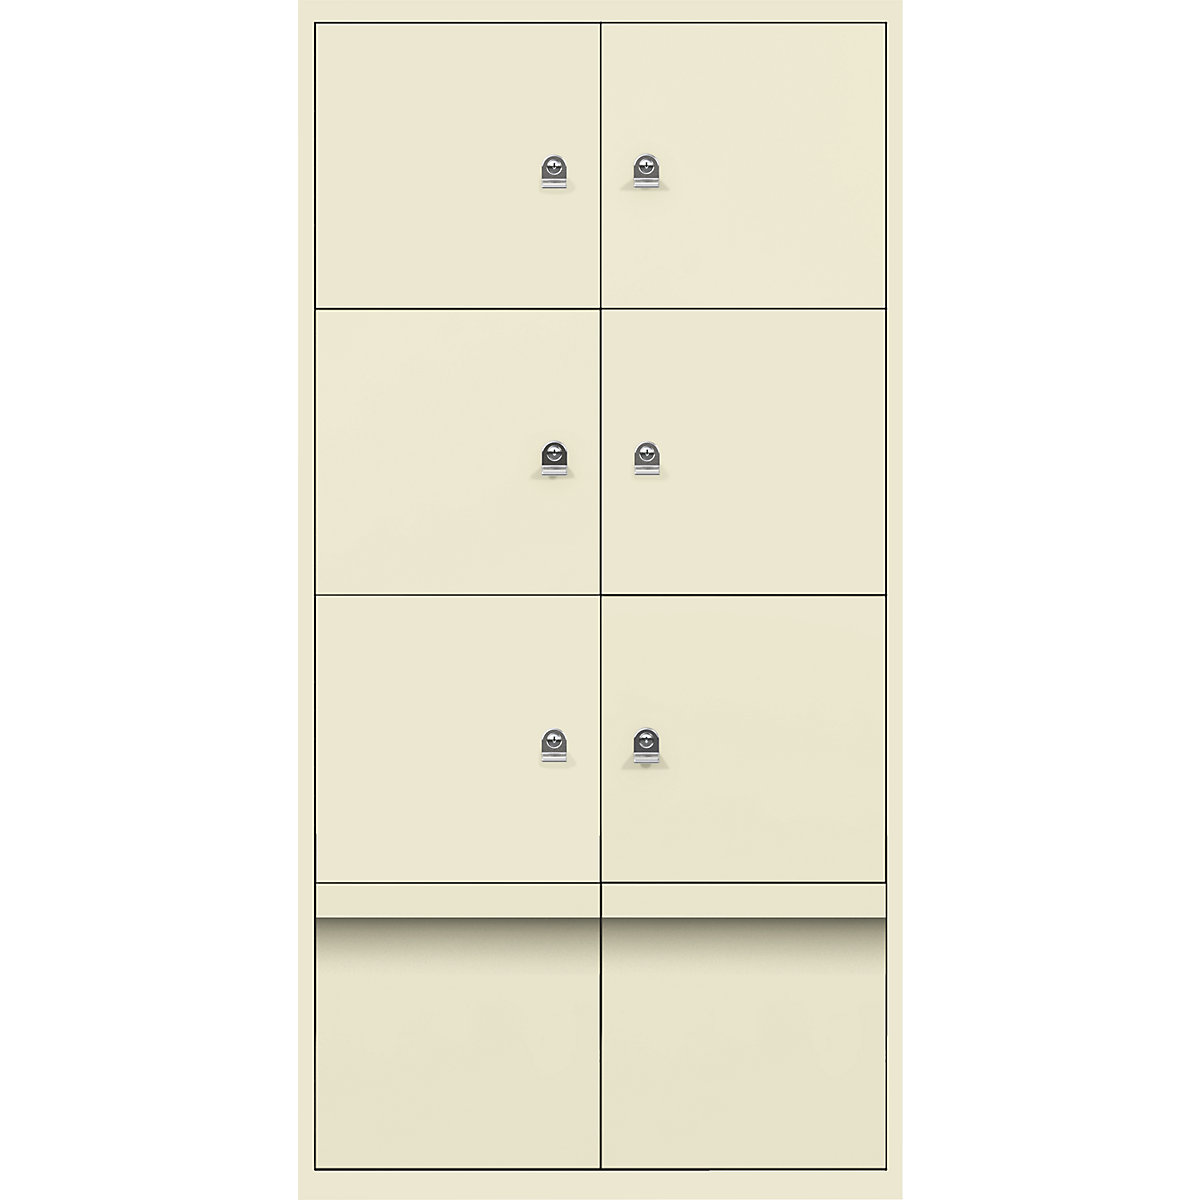 BISLEY – LateralFile™ lodge, with 6 lockable compartments and 2 drawers, height 375 mm each, light ivory